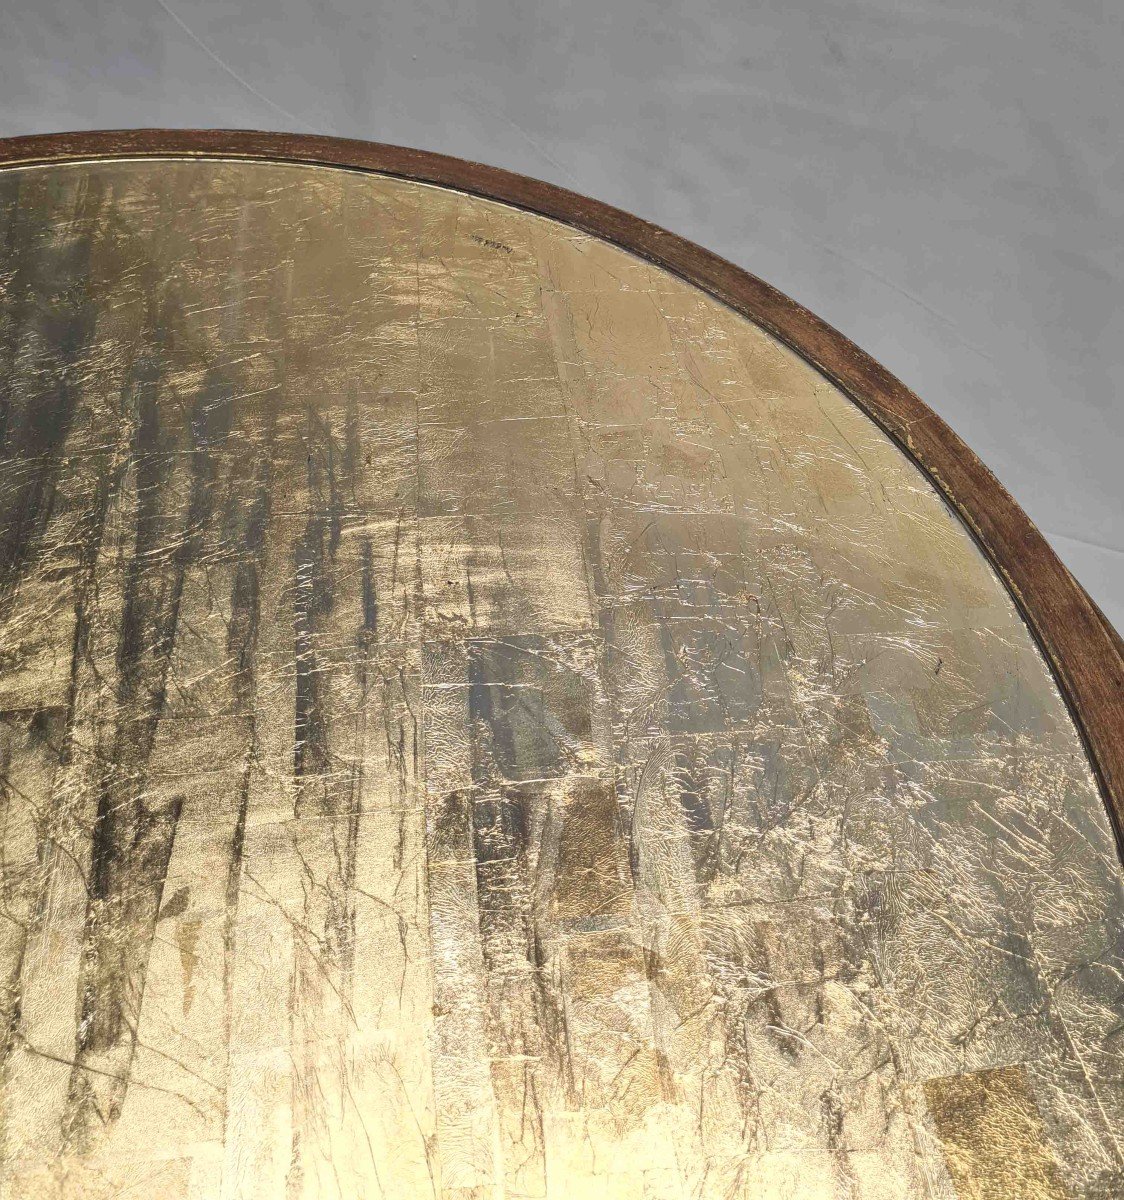 Maison Jansen Patinated Coffee Table With Gold Leaf-photo-4